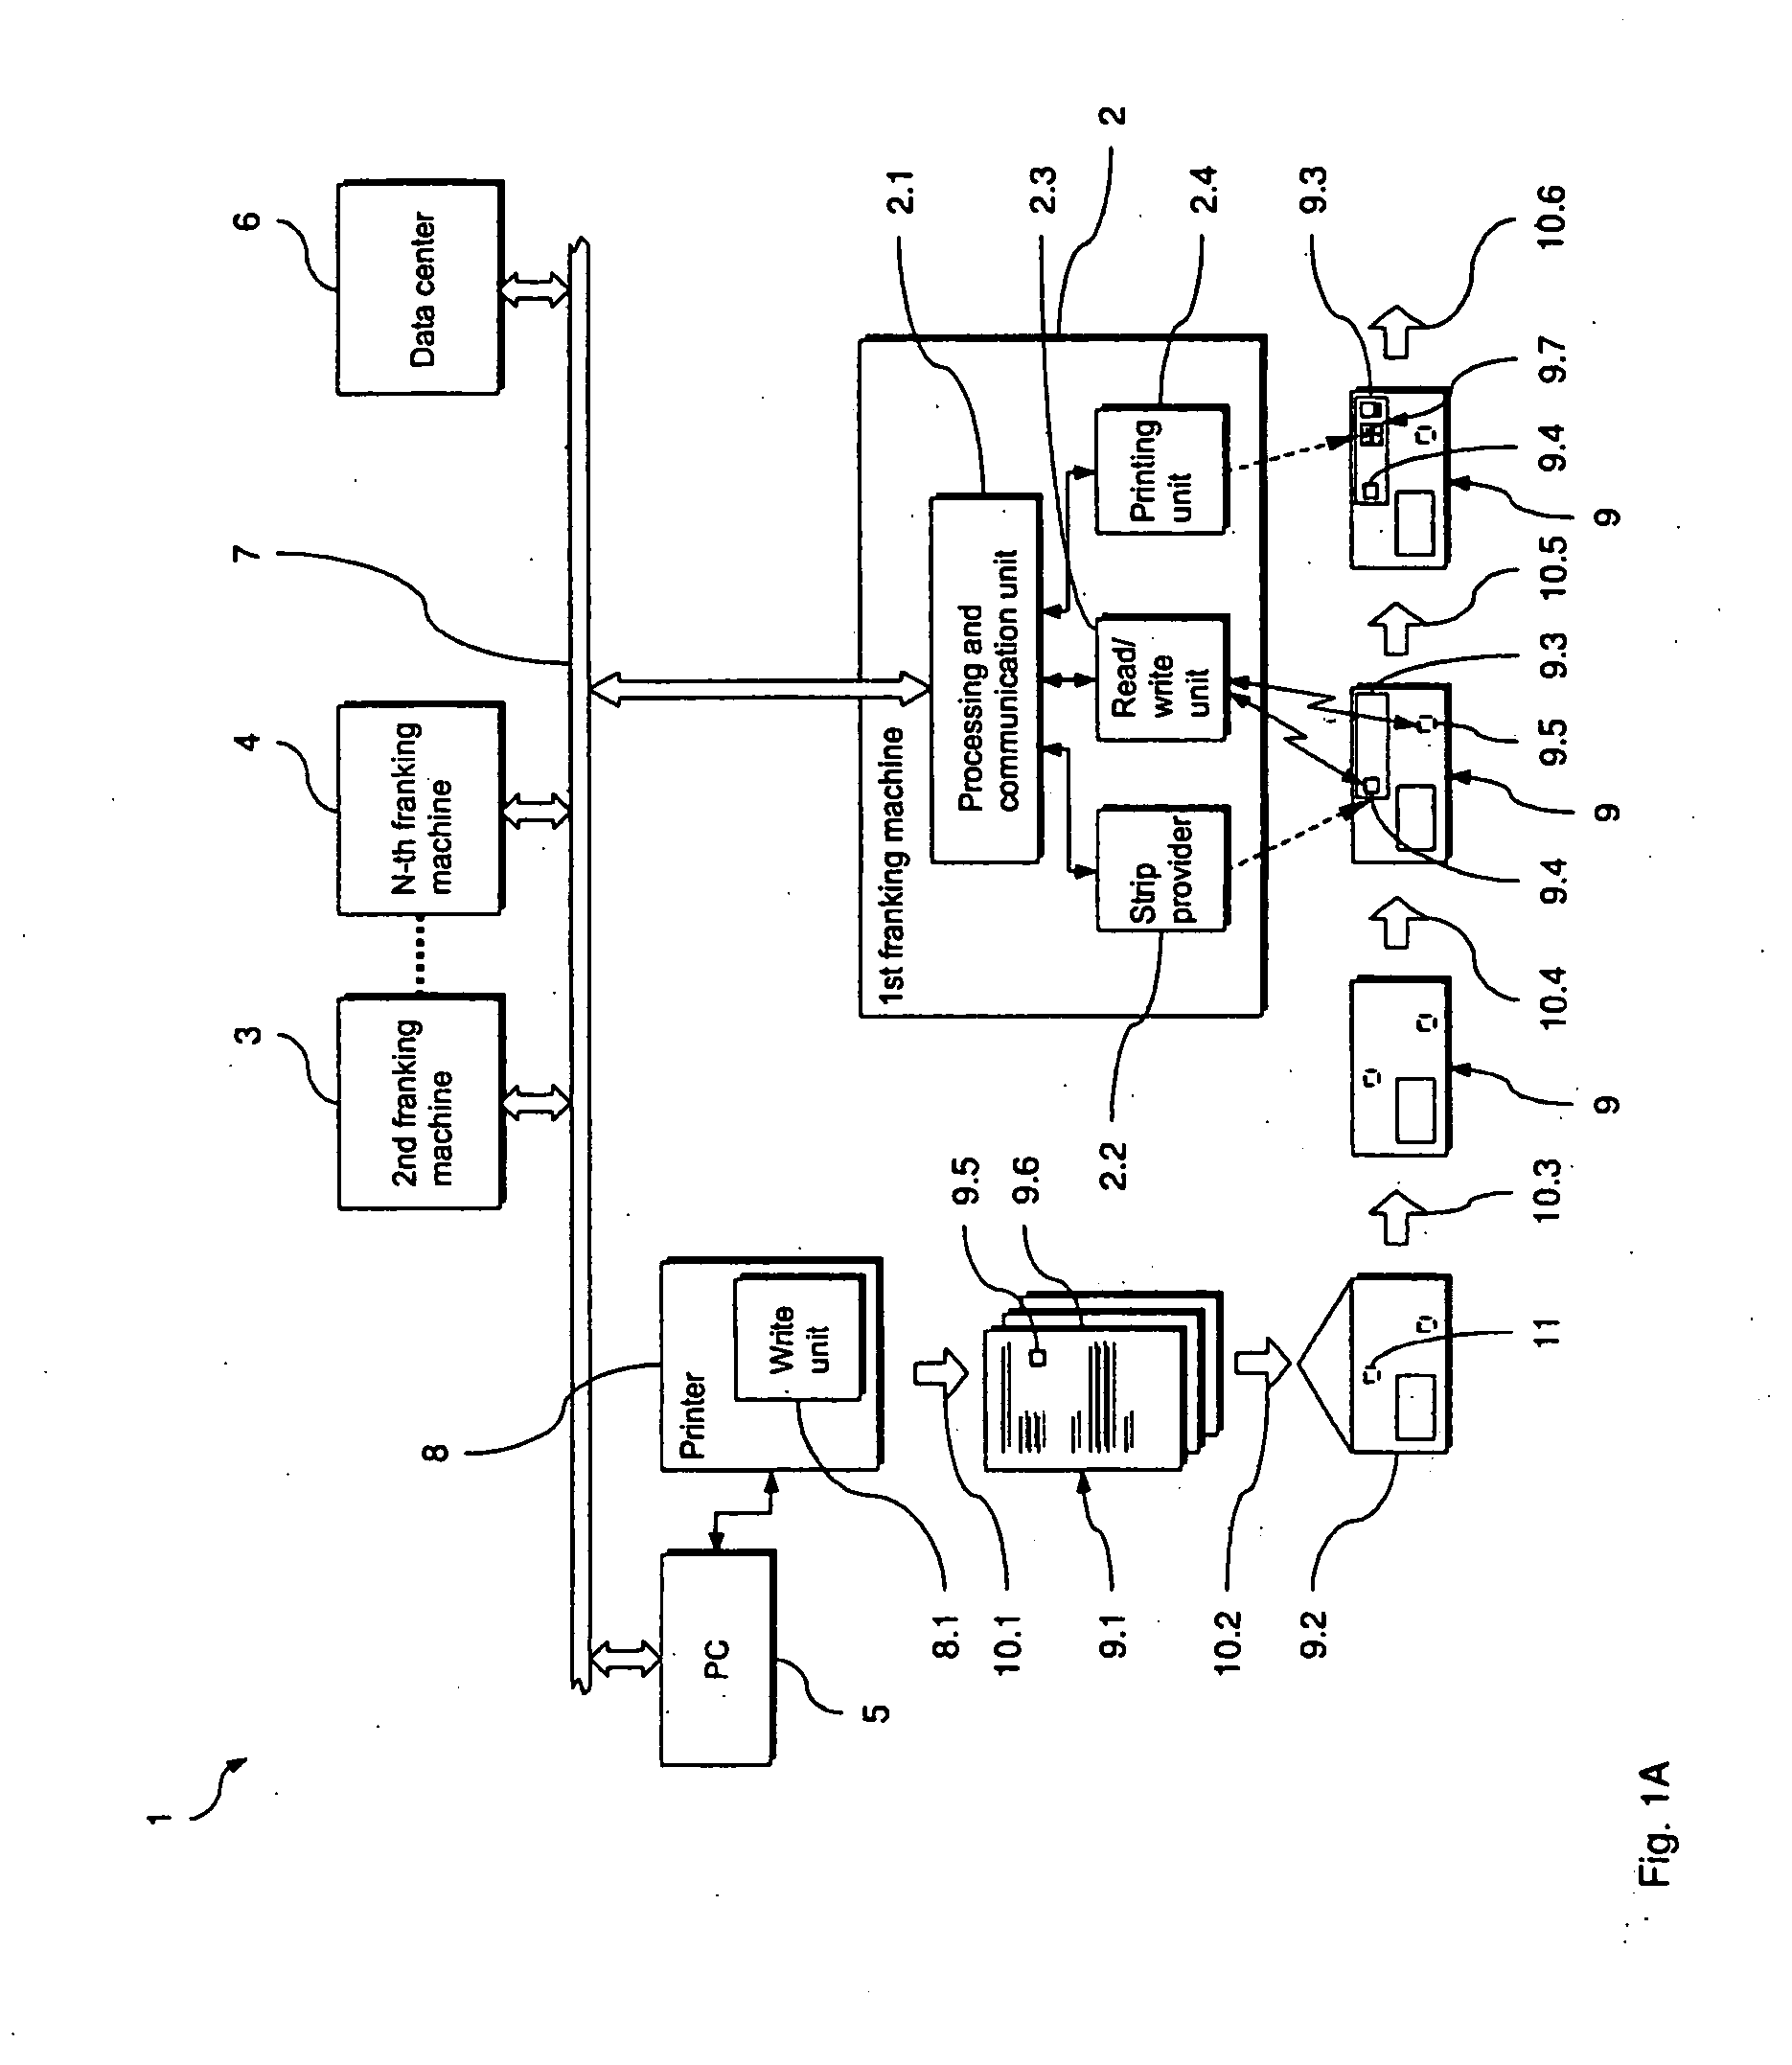 Method, processor and mail transport system for associating information with a mail item